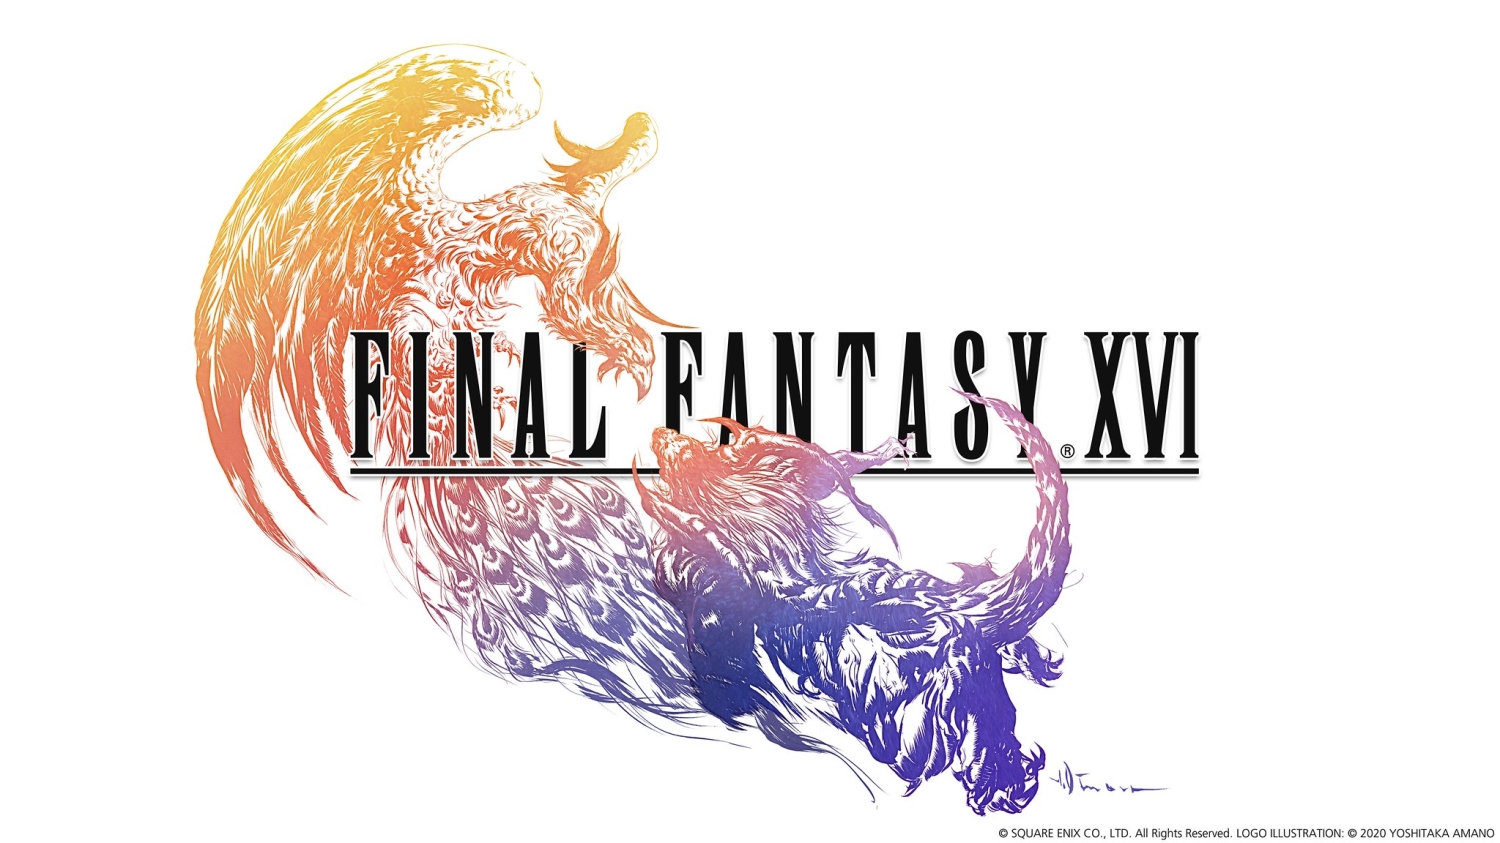 square-enix-members News, Reviews and Information